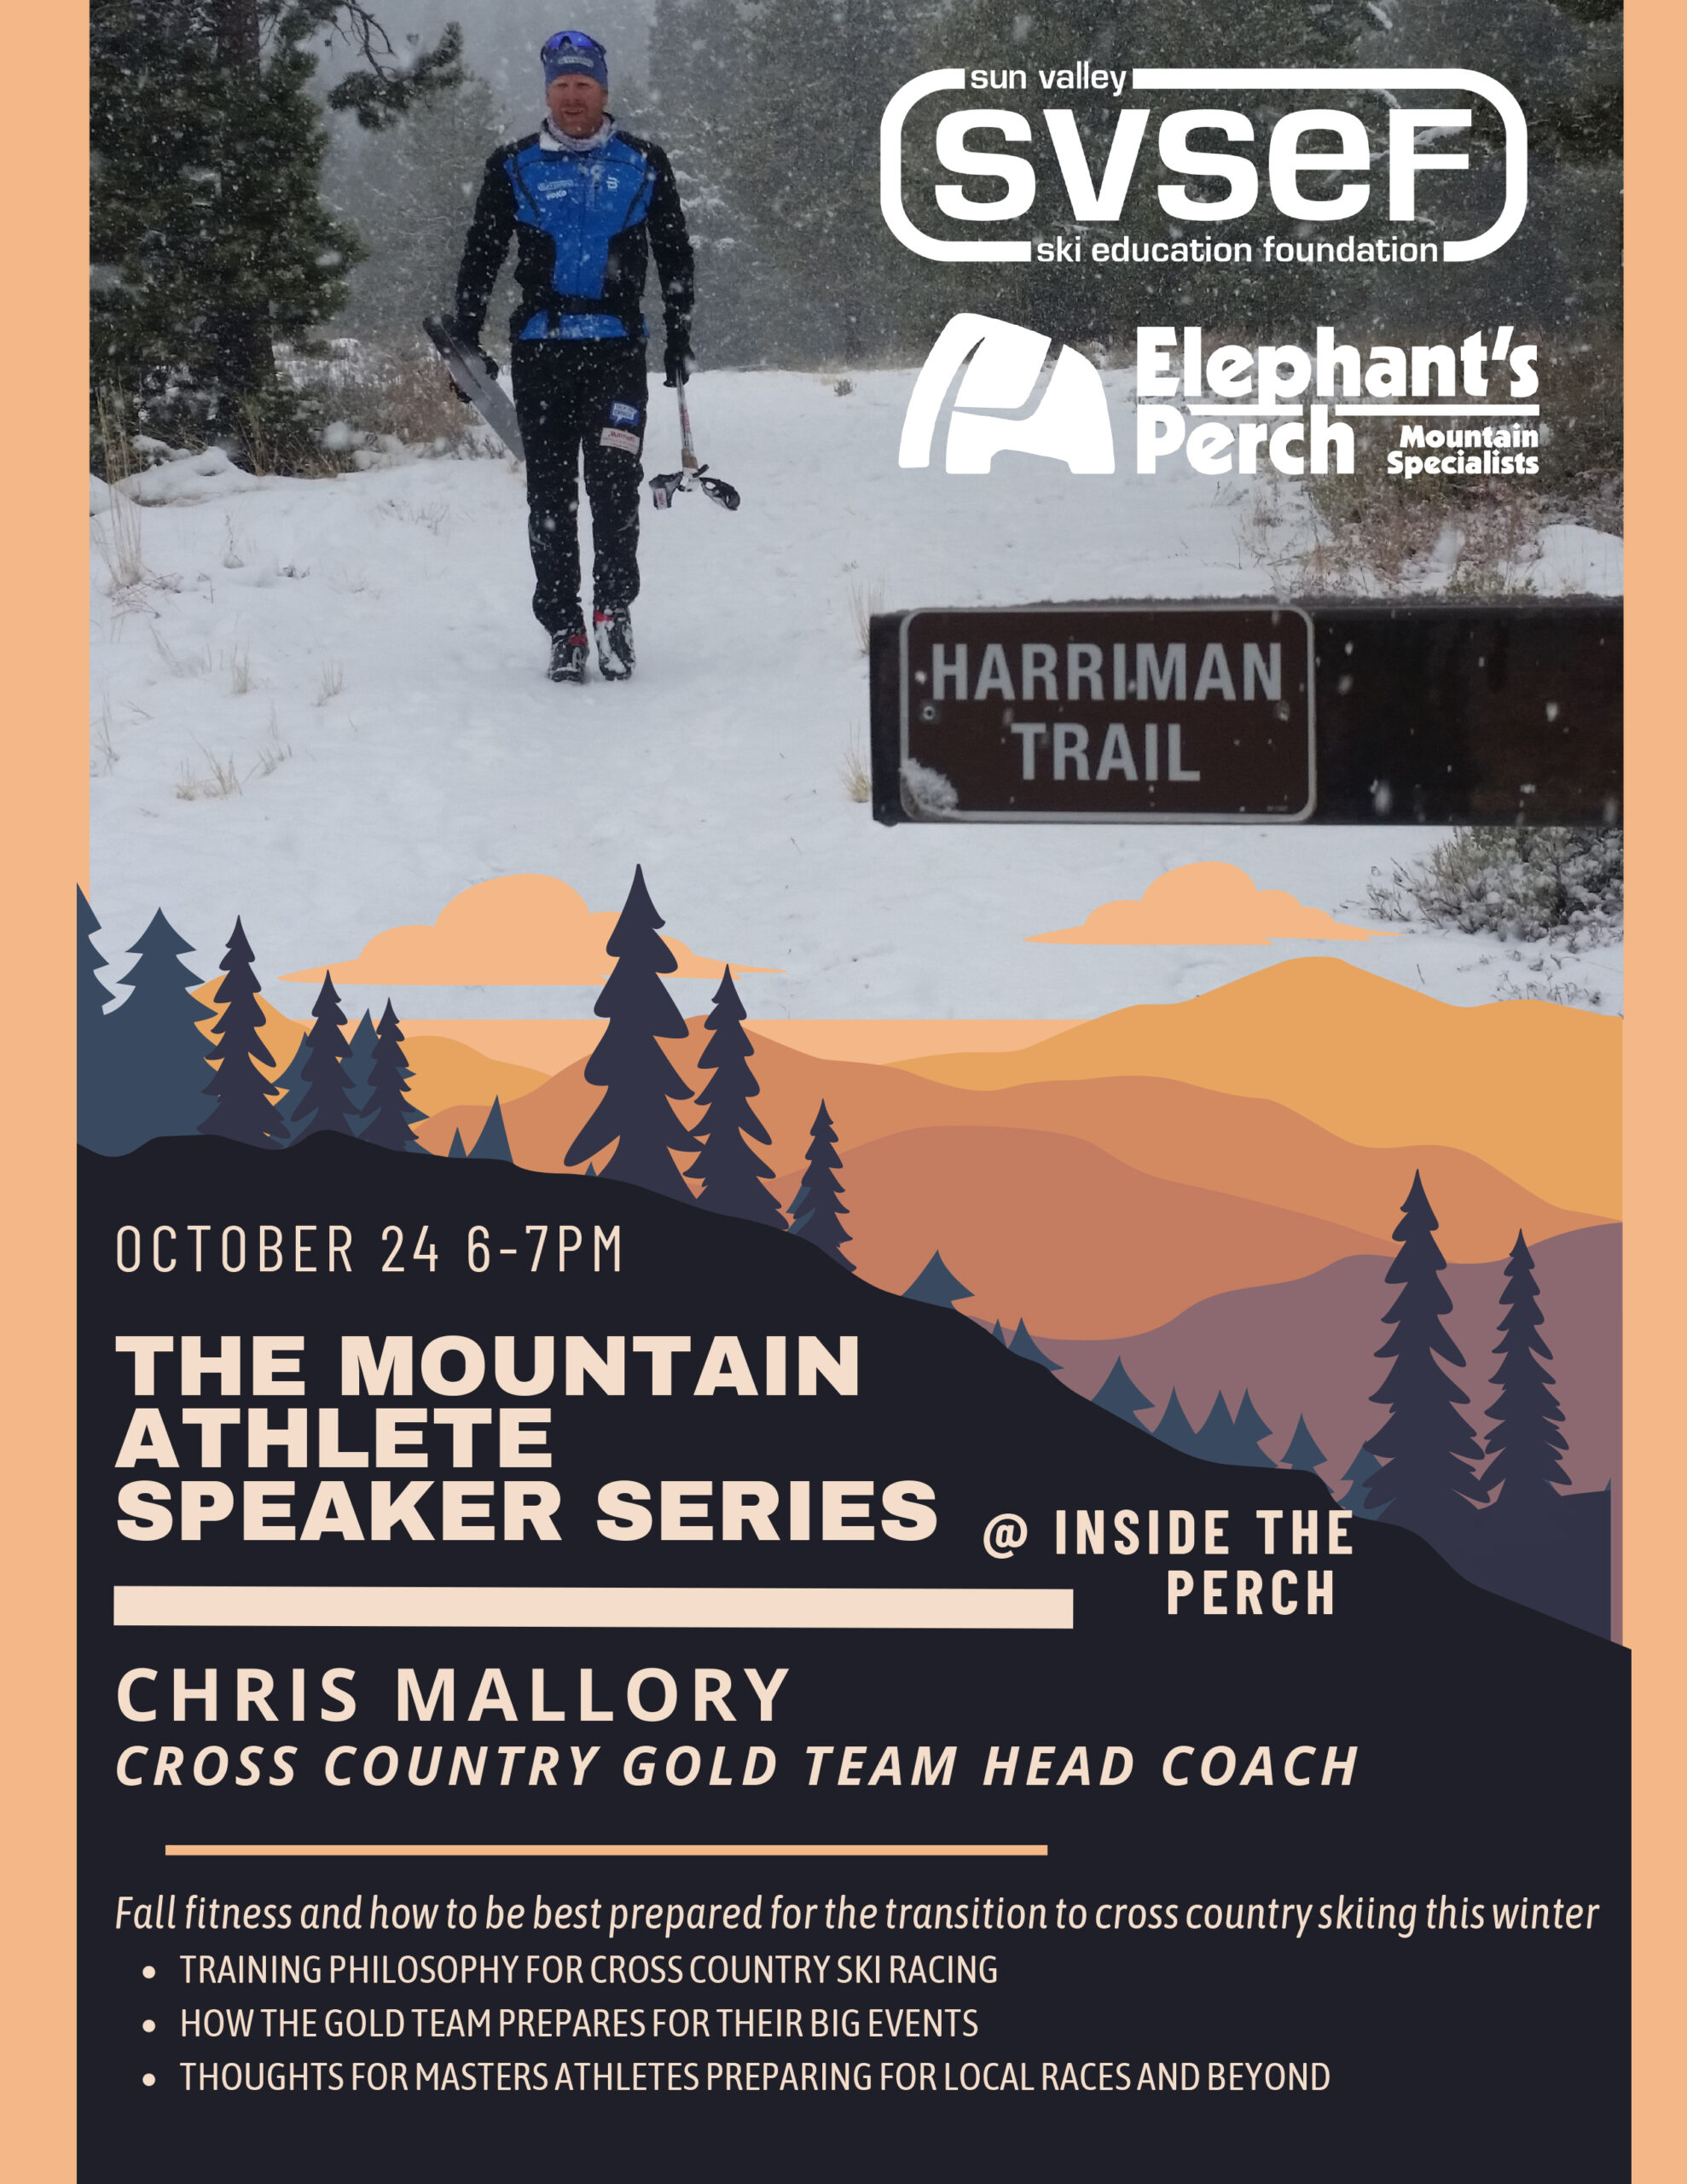 The mountain athlete speaker series at The Perch with Chris Mallory: cross country gold team head coach